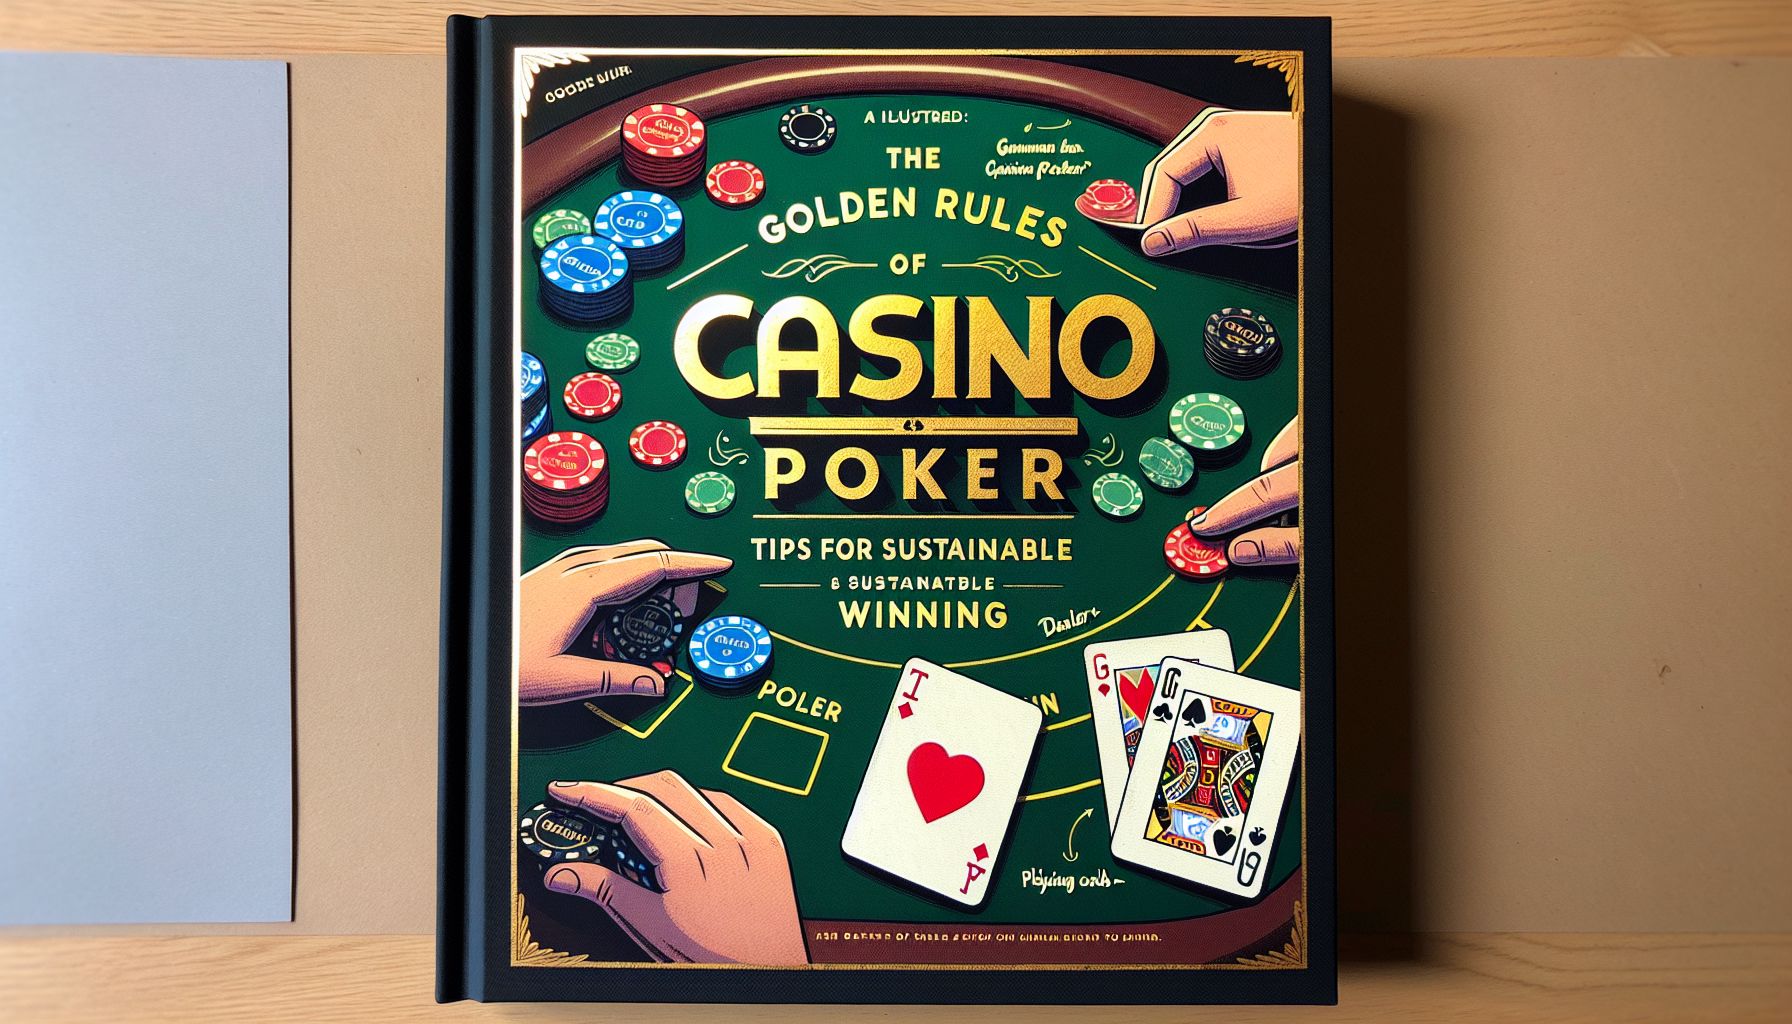 The Golden Rules of Casino Poker: Tips for Sustainable Winning